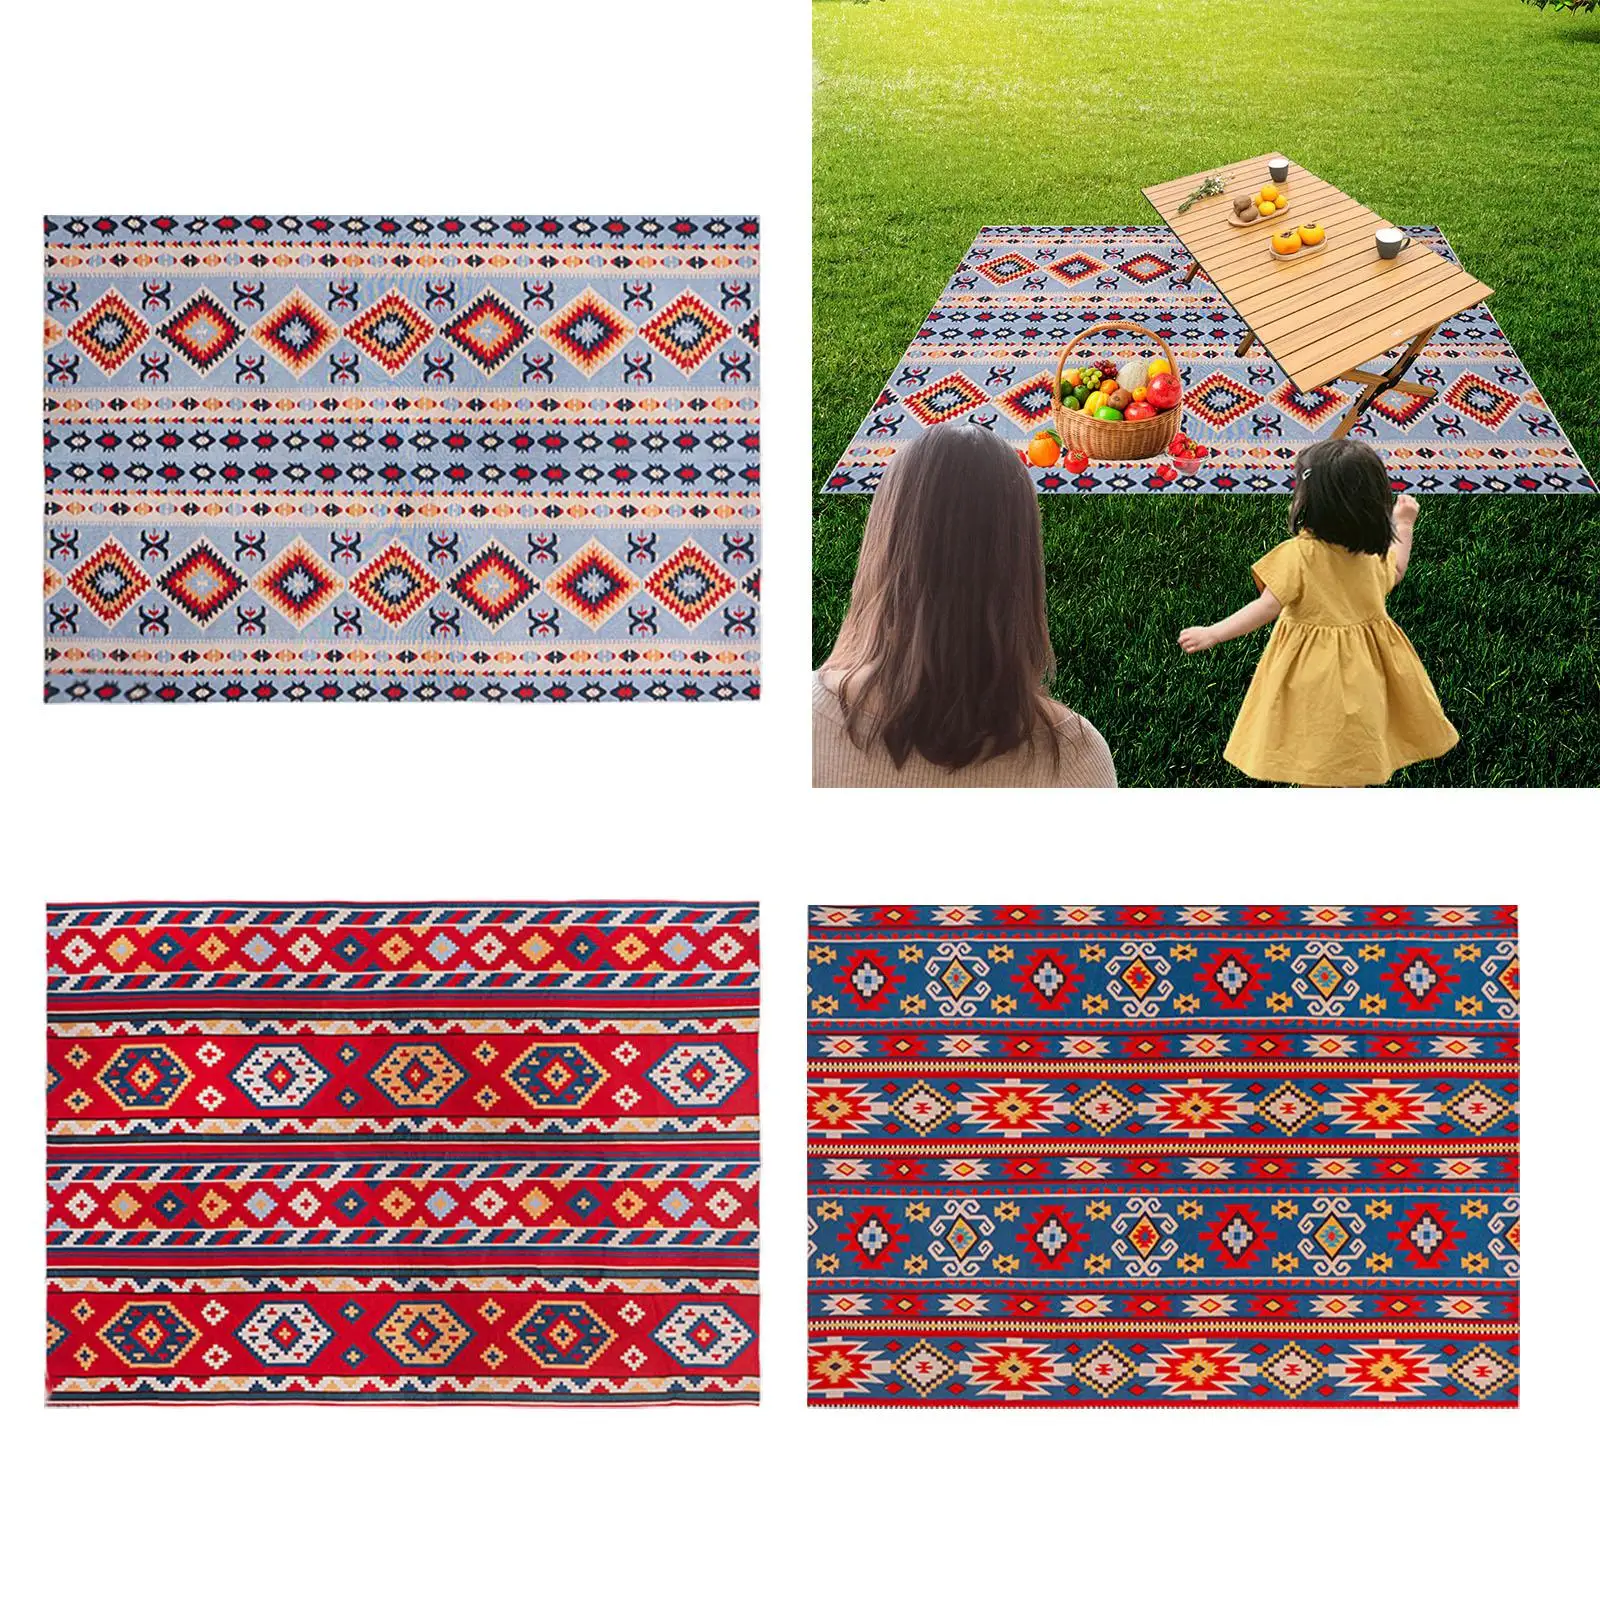 Large Picnic Outdoor Blanket Camping Blanket Moistureproof Blanket Mat Picnic Mat for Park Hiking Lawn Travel Sporting Events